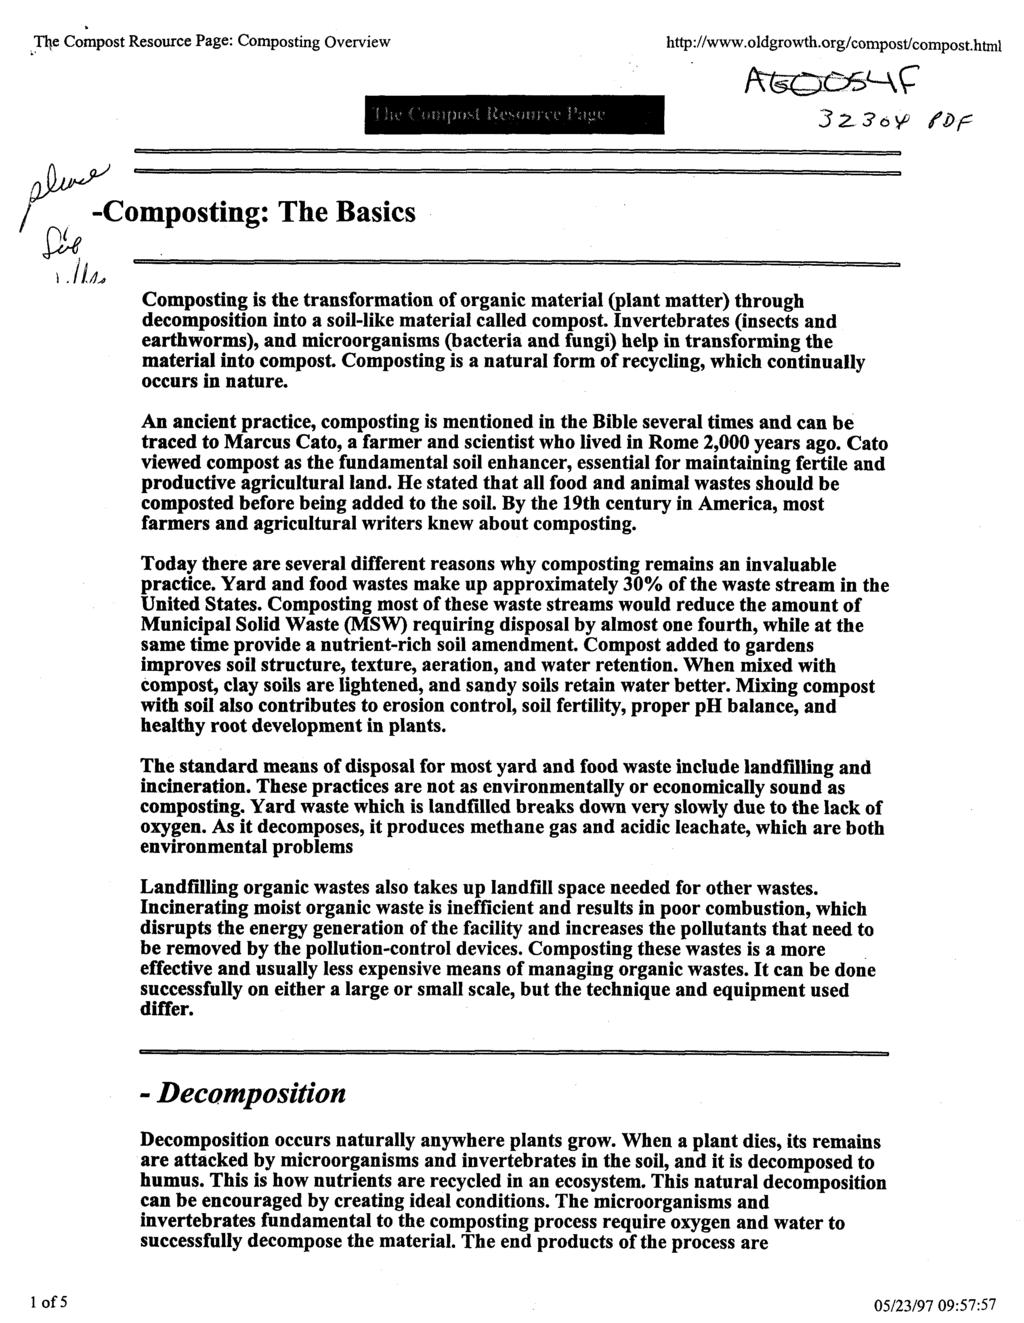 q e Compost Resource Page: Composting Overview http ://www.oldgrowth.org/compost/compost.html wc / A/ -Composting: The Basics P I.